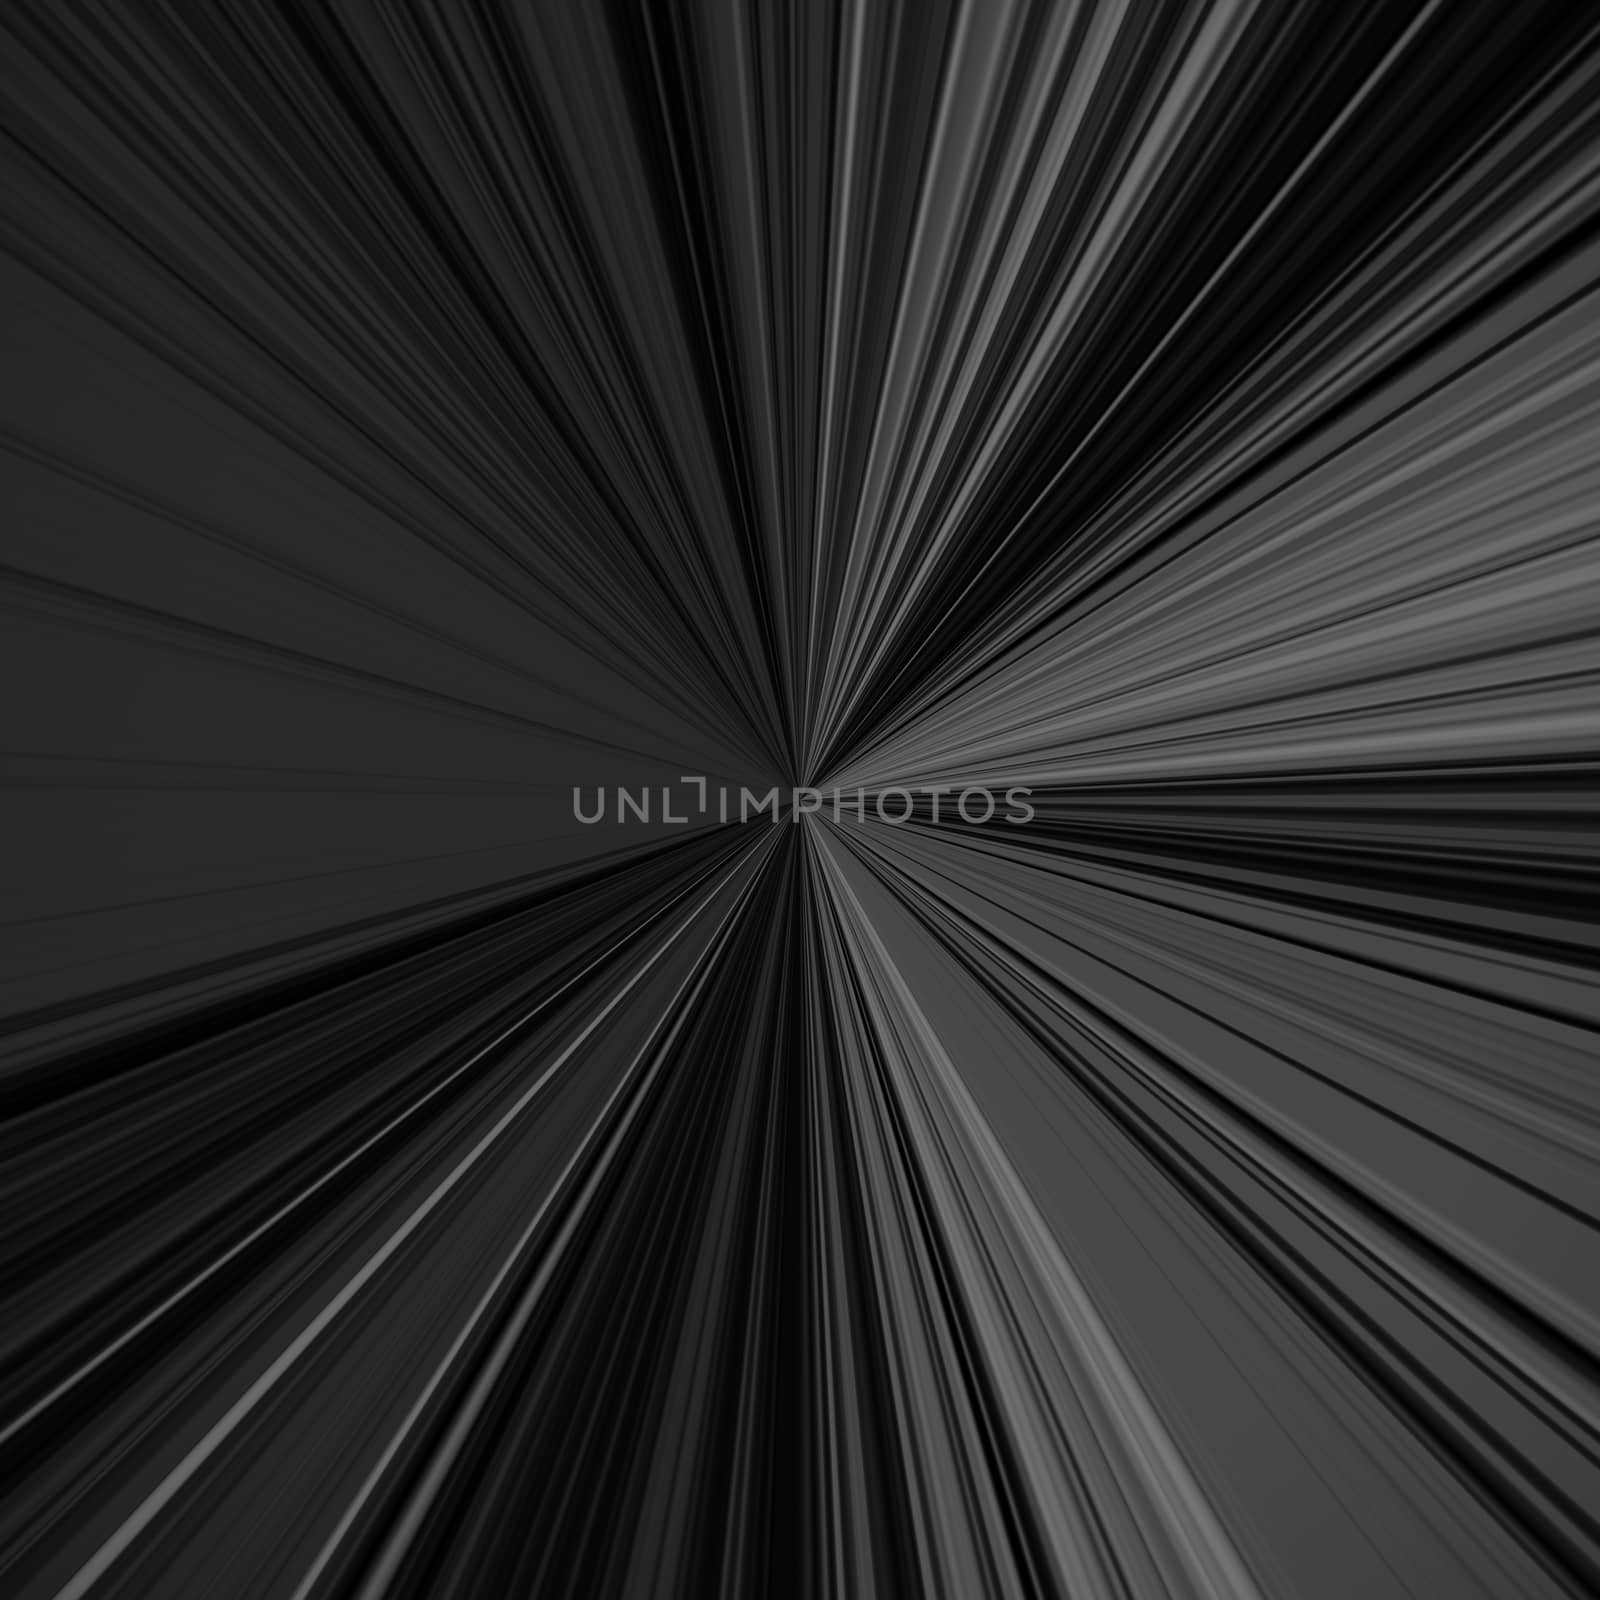 Beautiful abstract starburst background, black and white